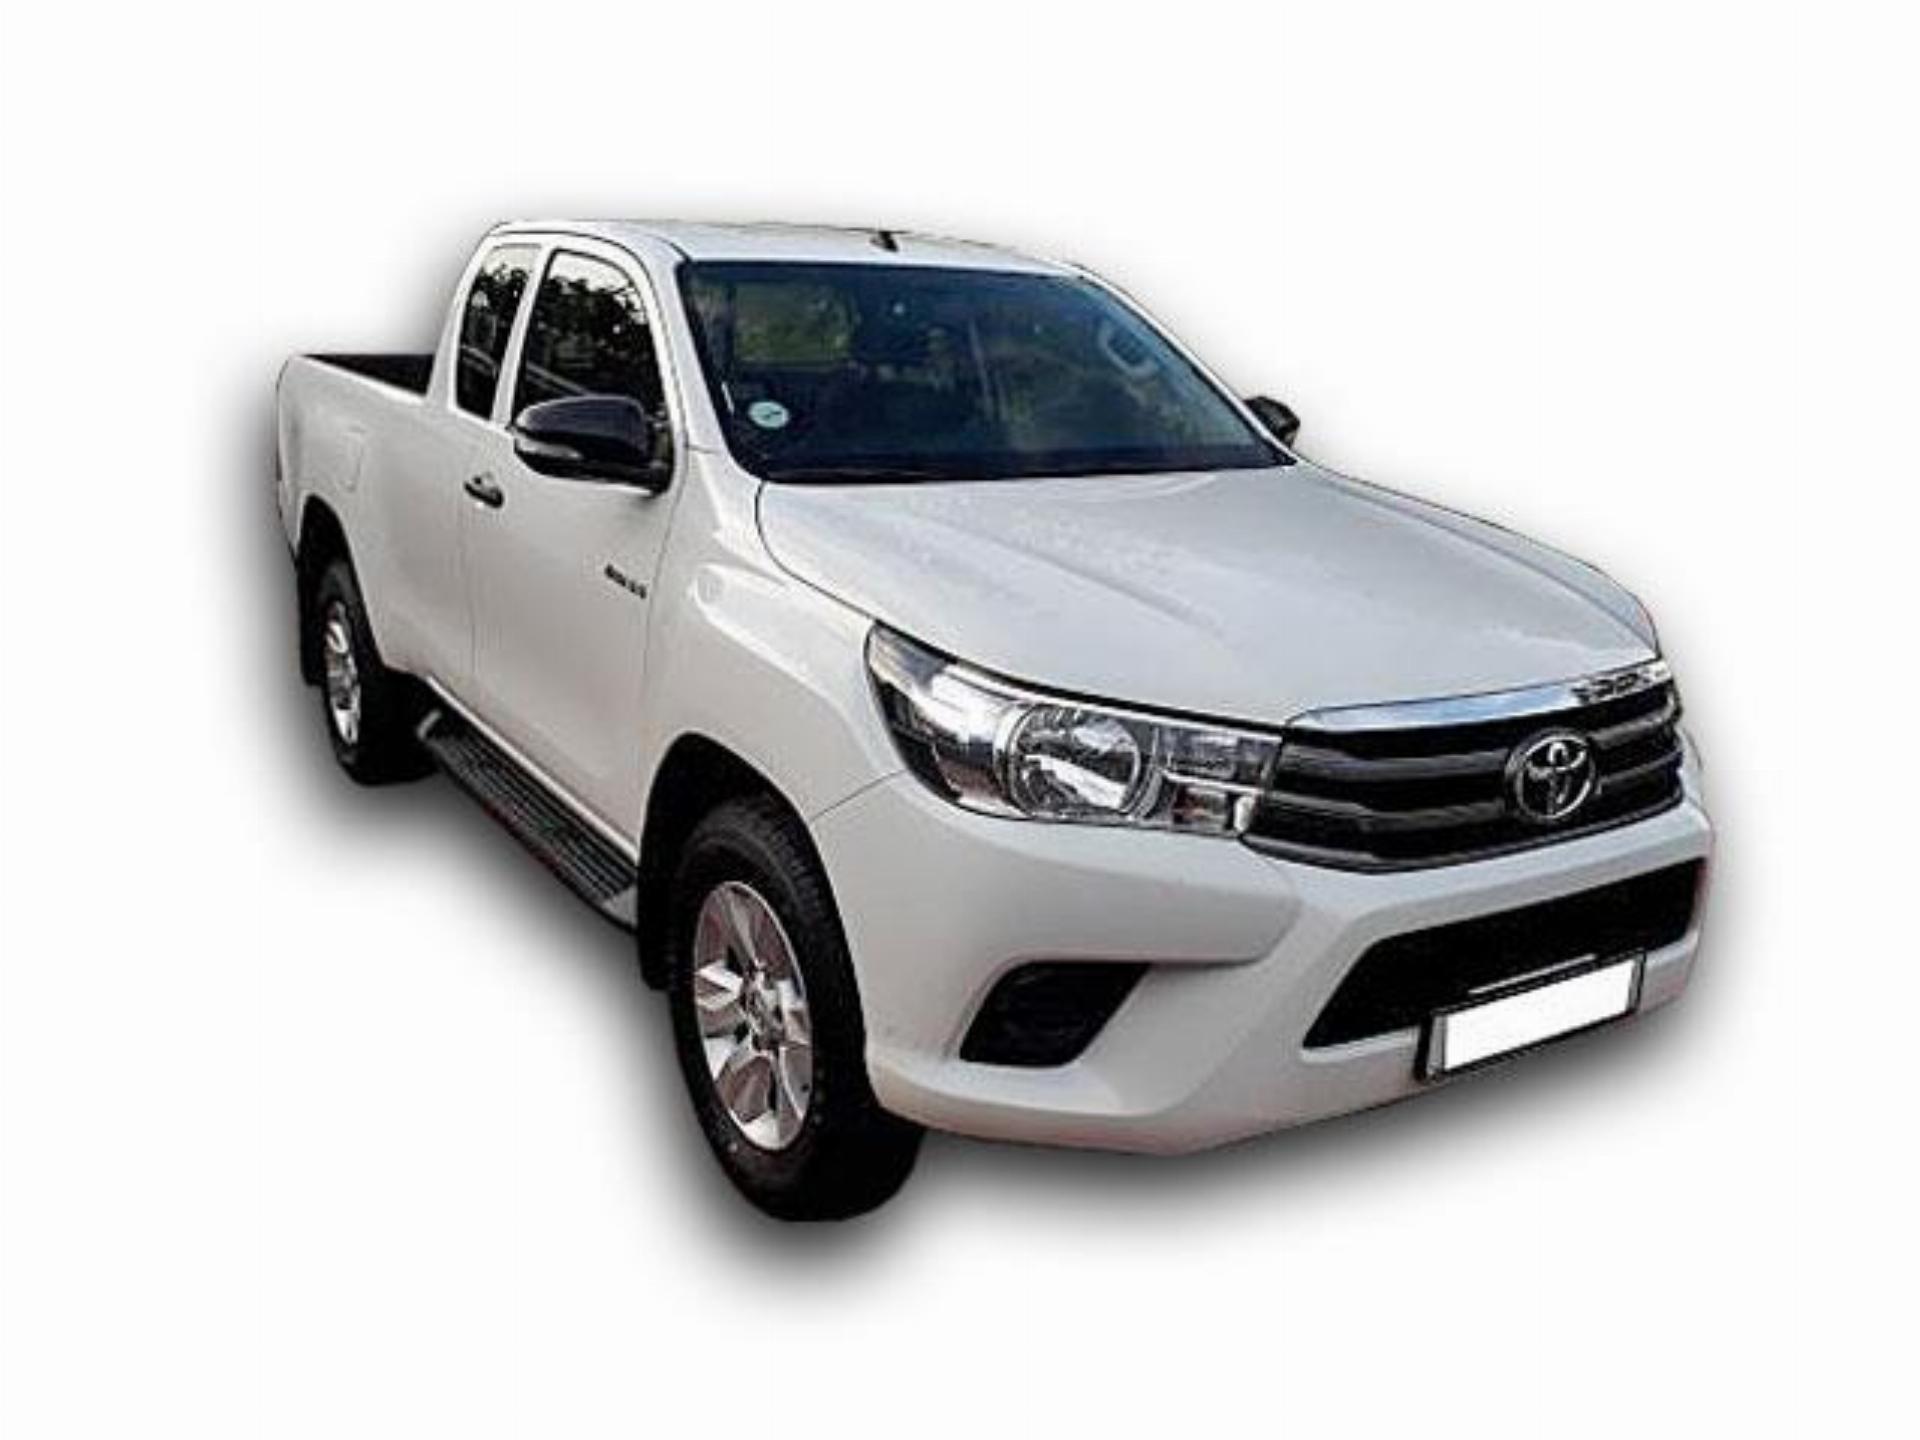 Toyota Hilux 2.4 GD-6 RB SRX Extended Cab